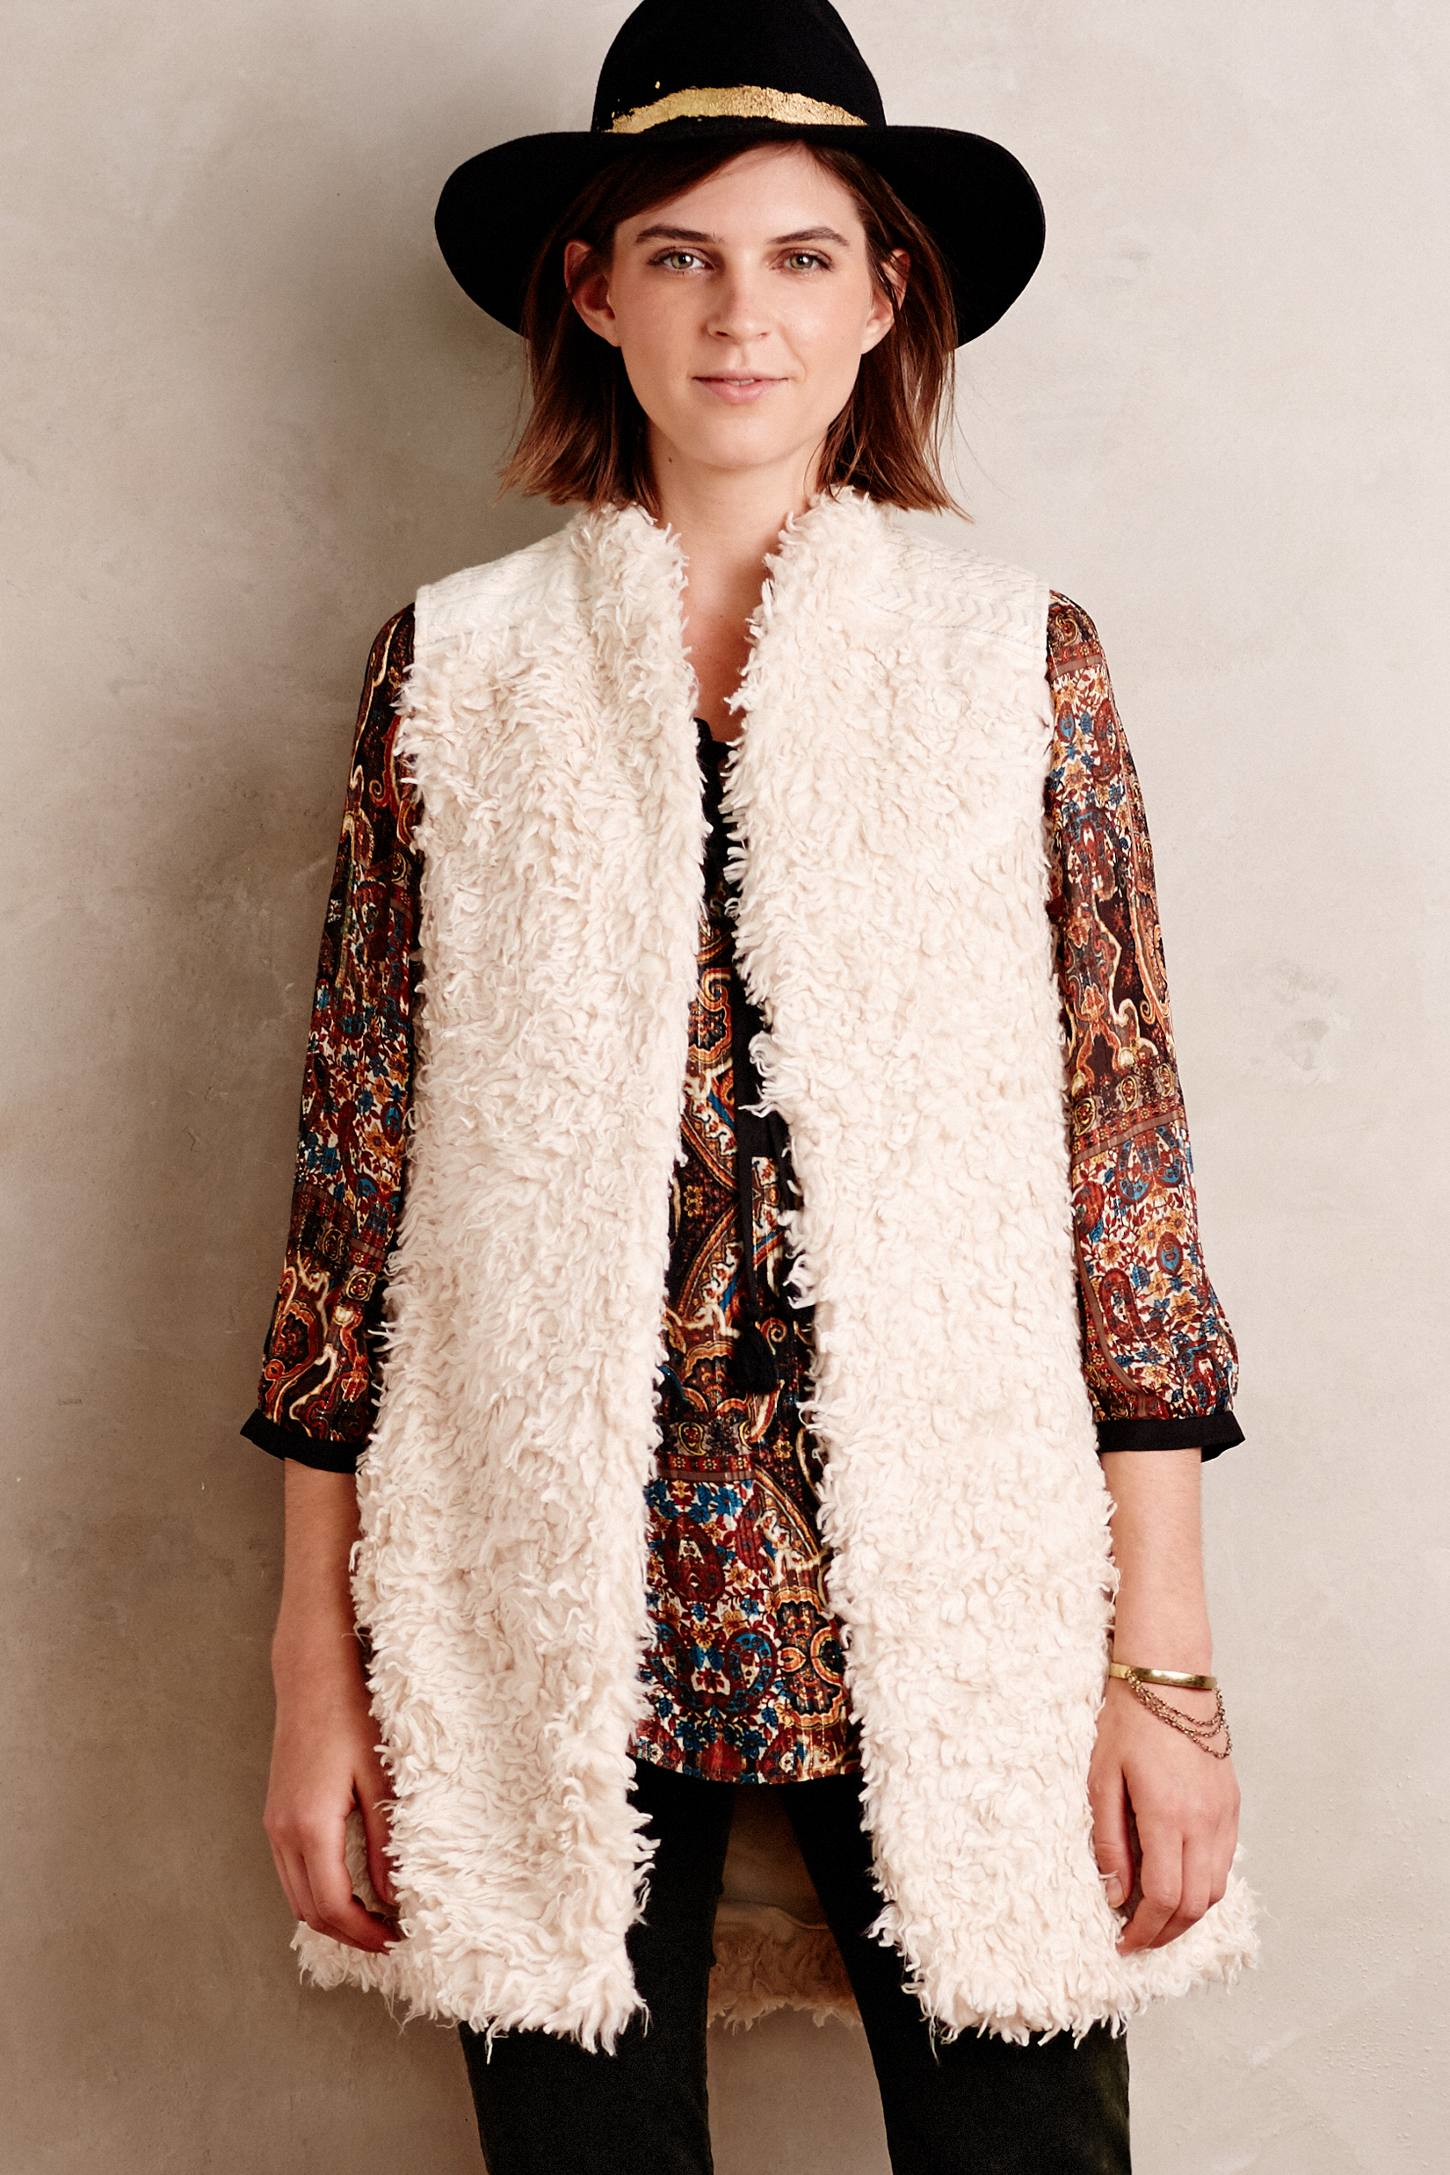 Lyst - Hei Hei Embroidered Shaggy Vest in White